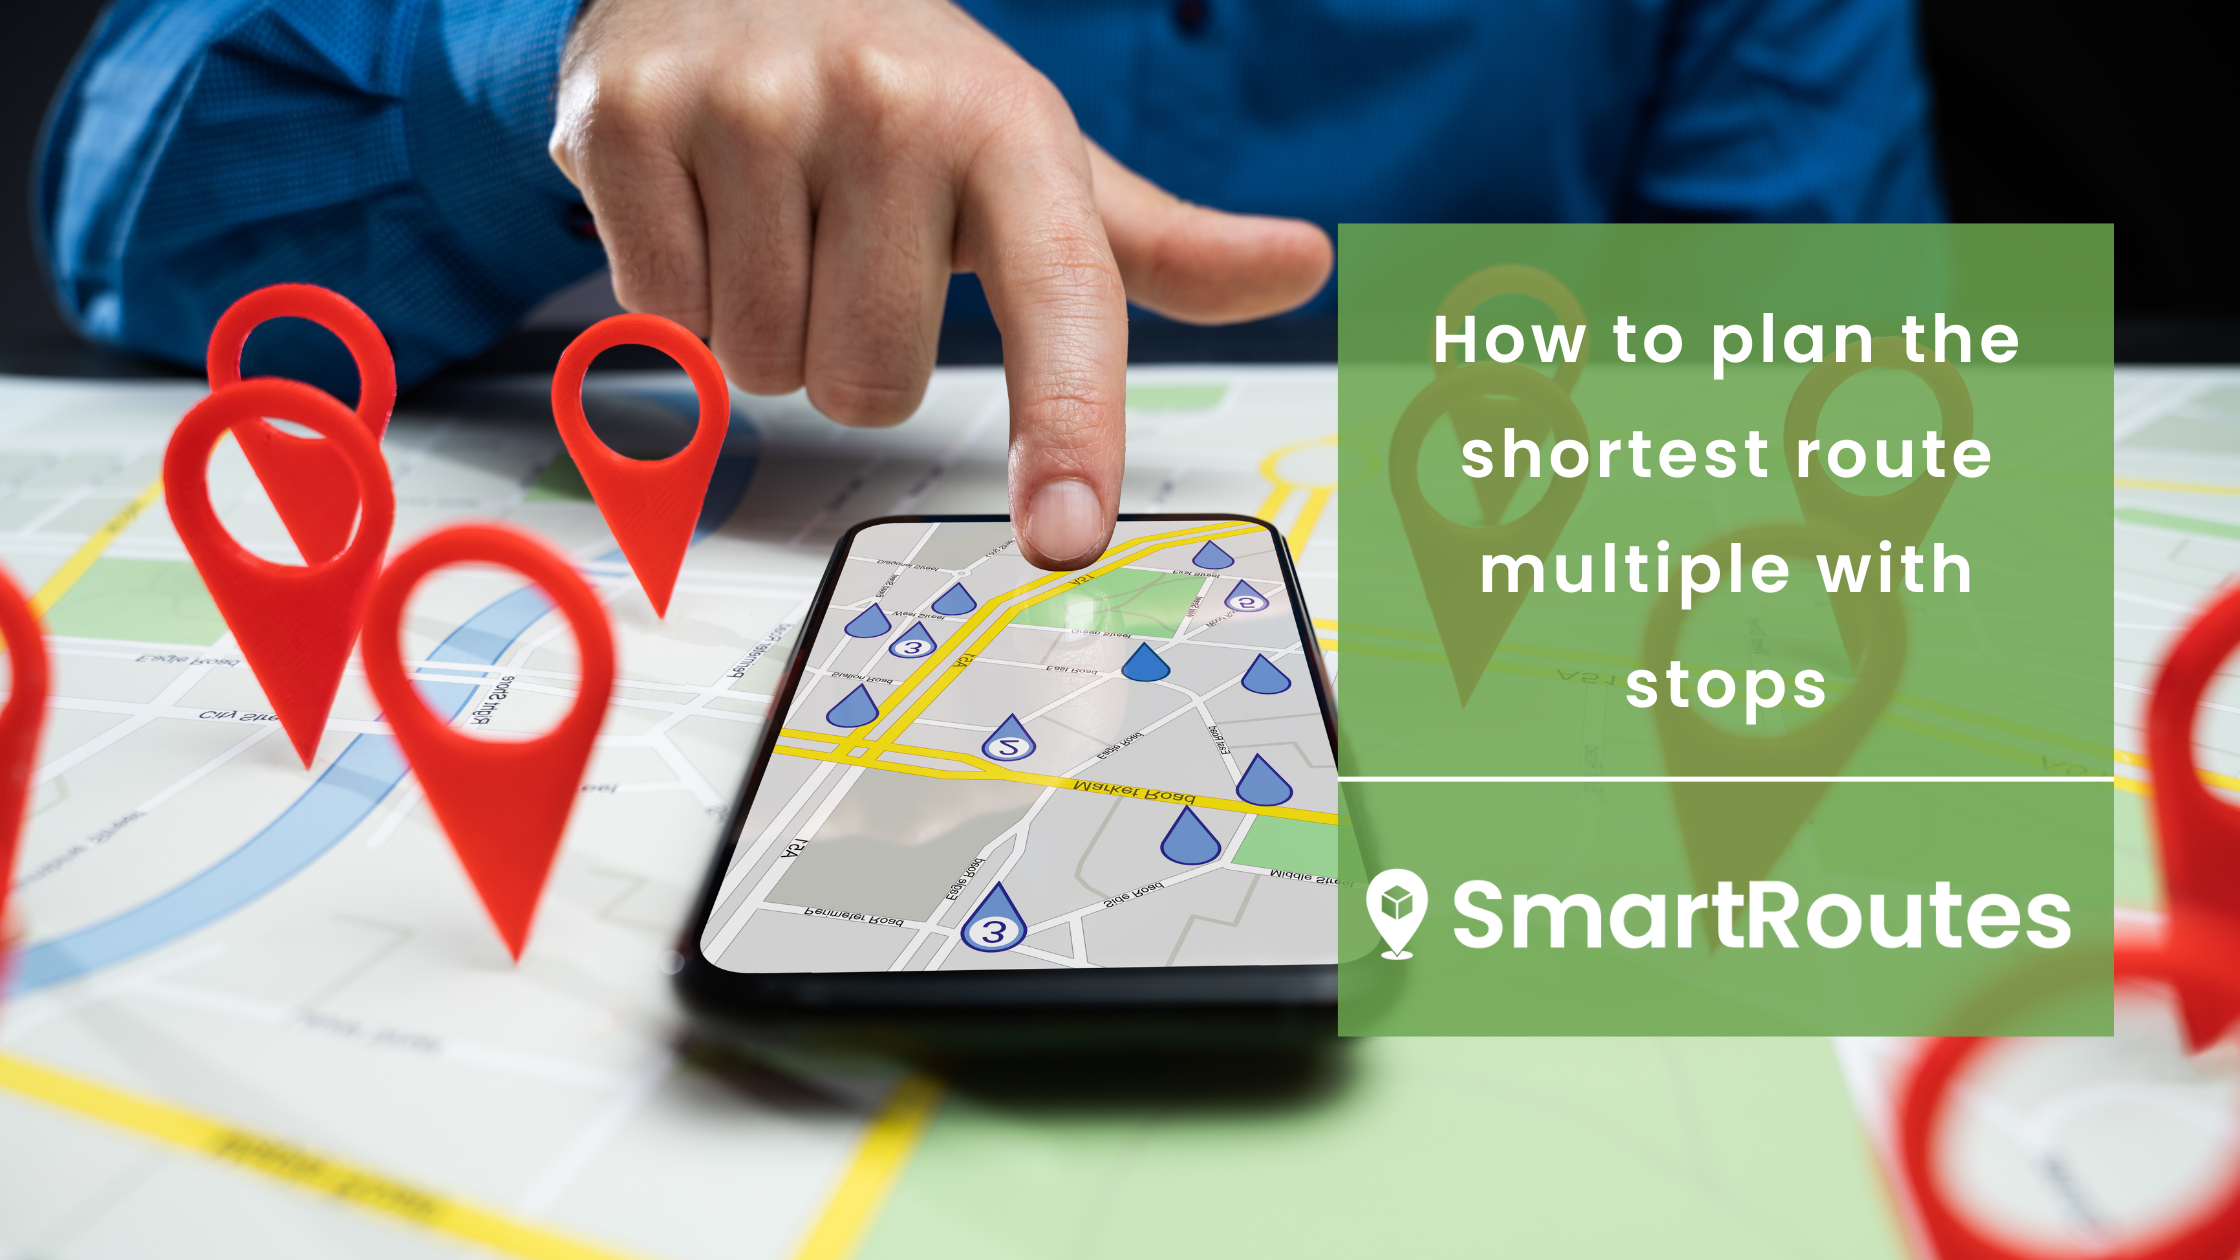 How to plan the shortest route multiple with stops